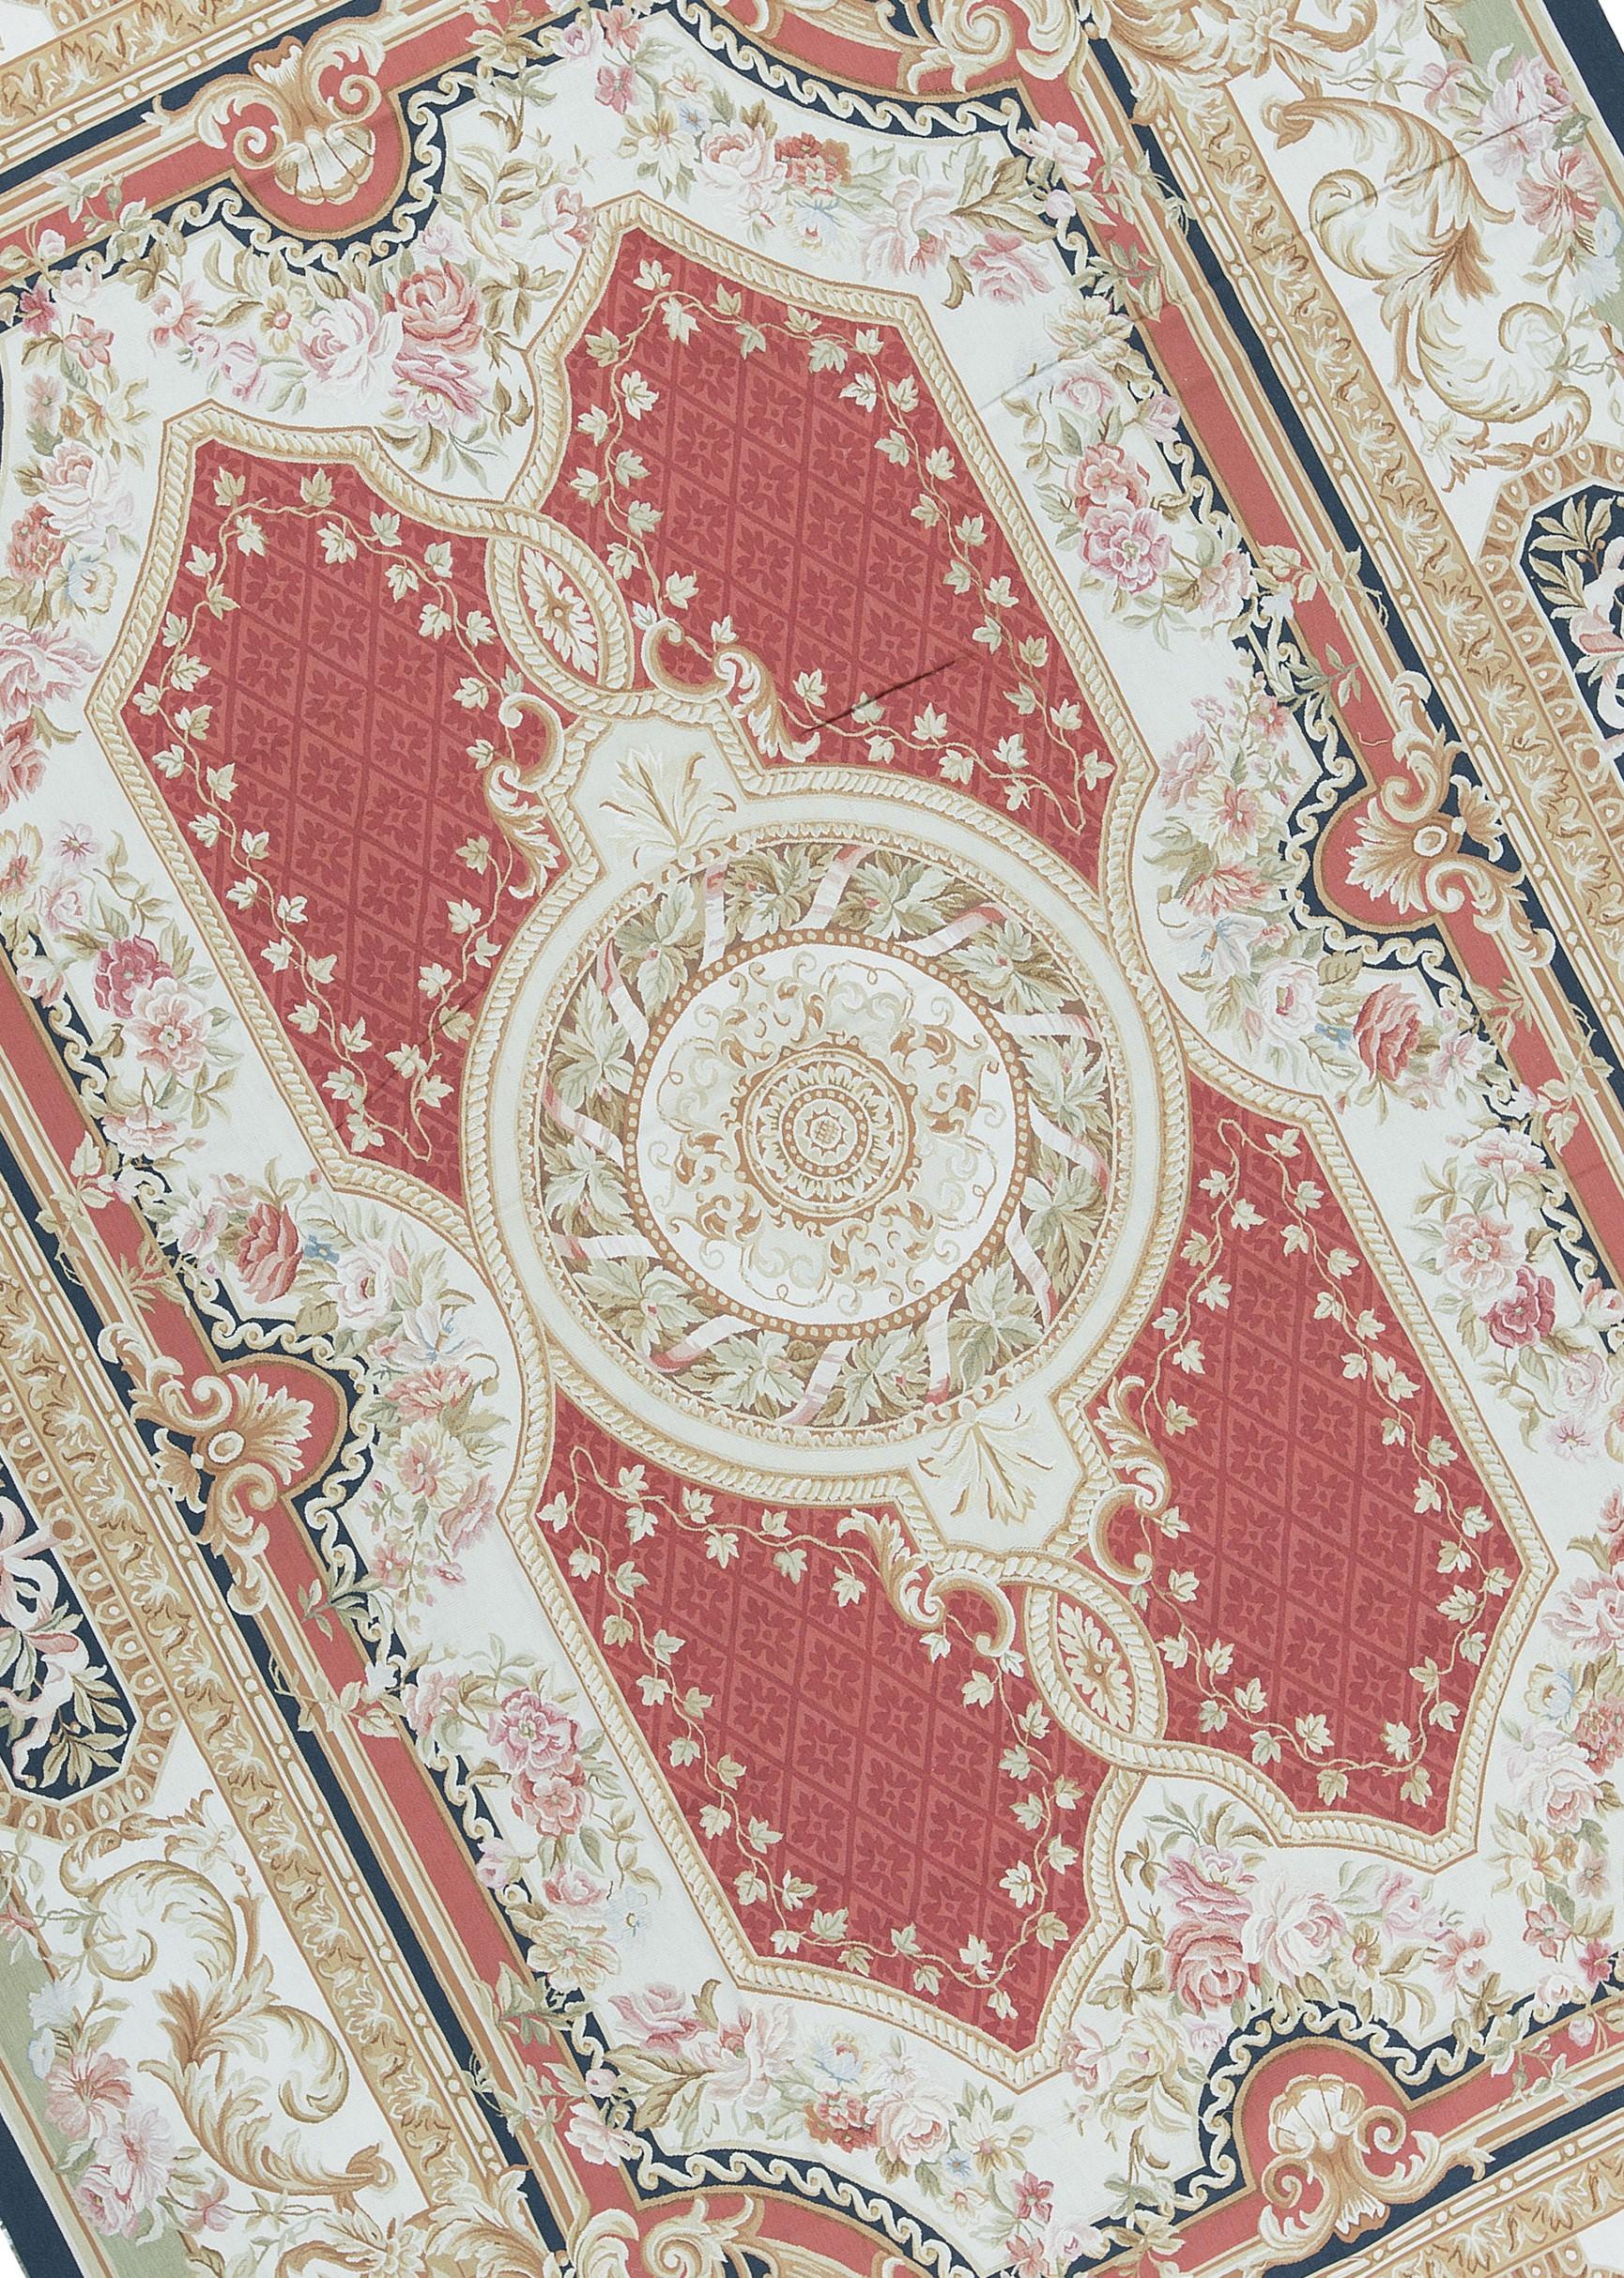 Handwoven Recreation of the Classic French flat-weave Aubusson rugs that have been found in the finest homes and palaces since the late 17th century. Size 10' x 14'.